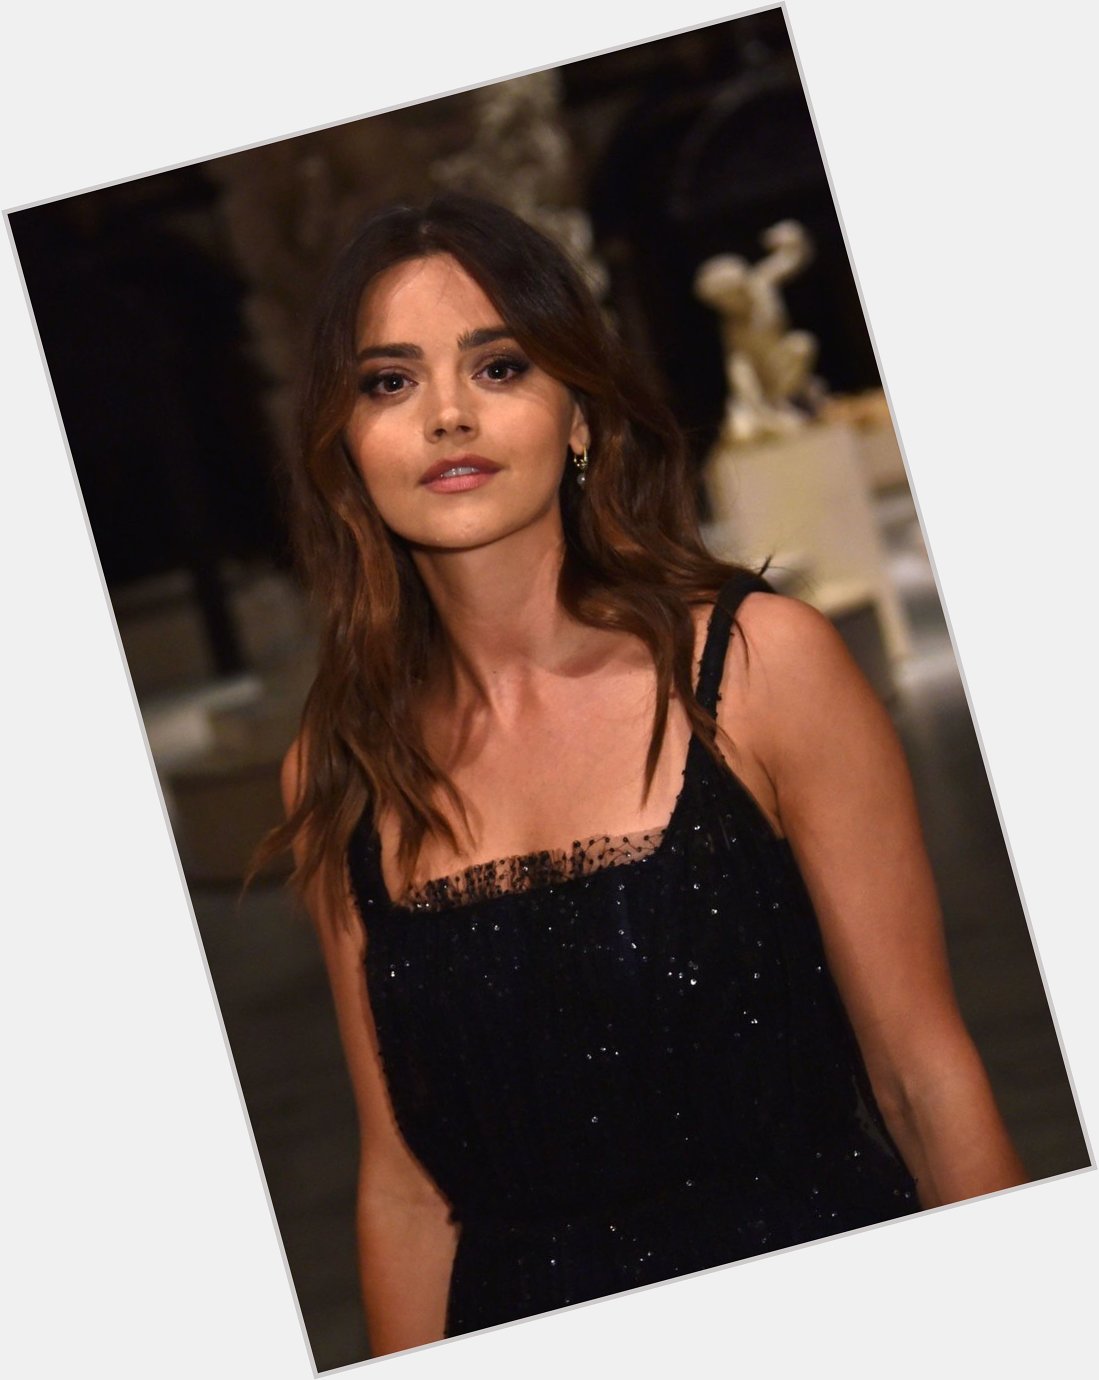 Happy birthday to the amazingly talented and beautiful Jenna Coleman! 